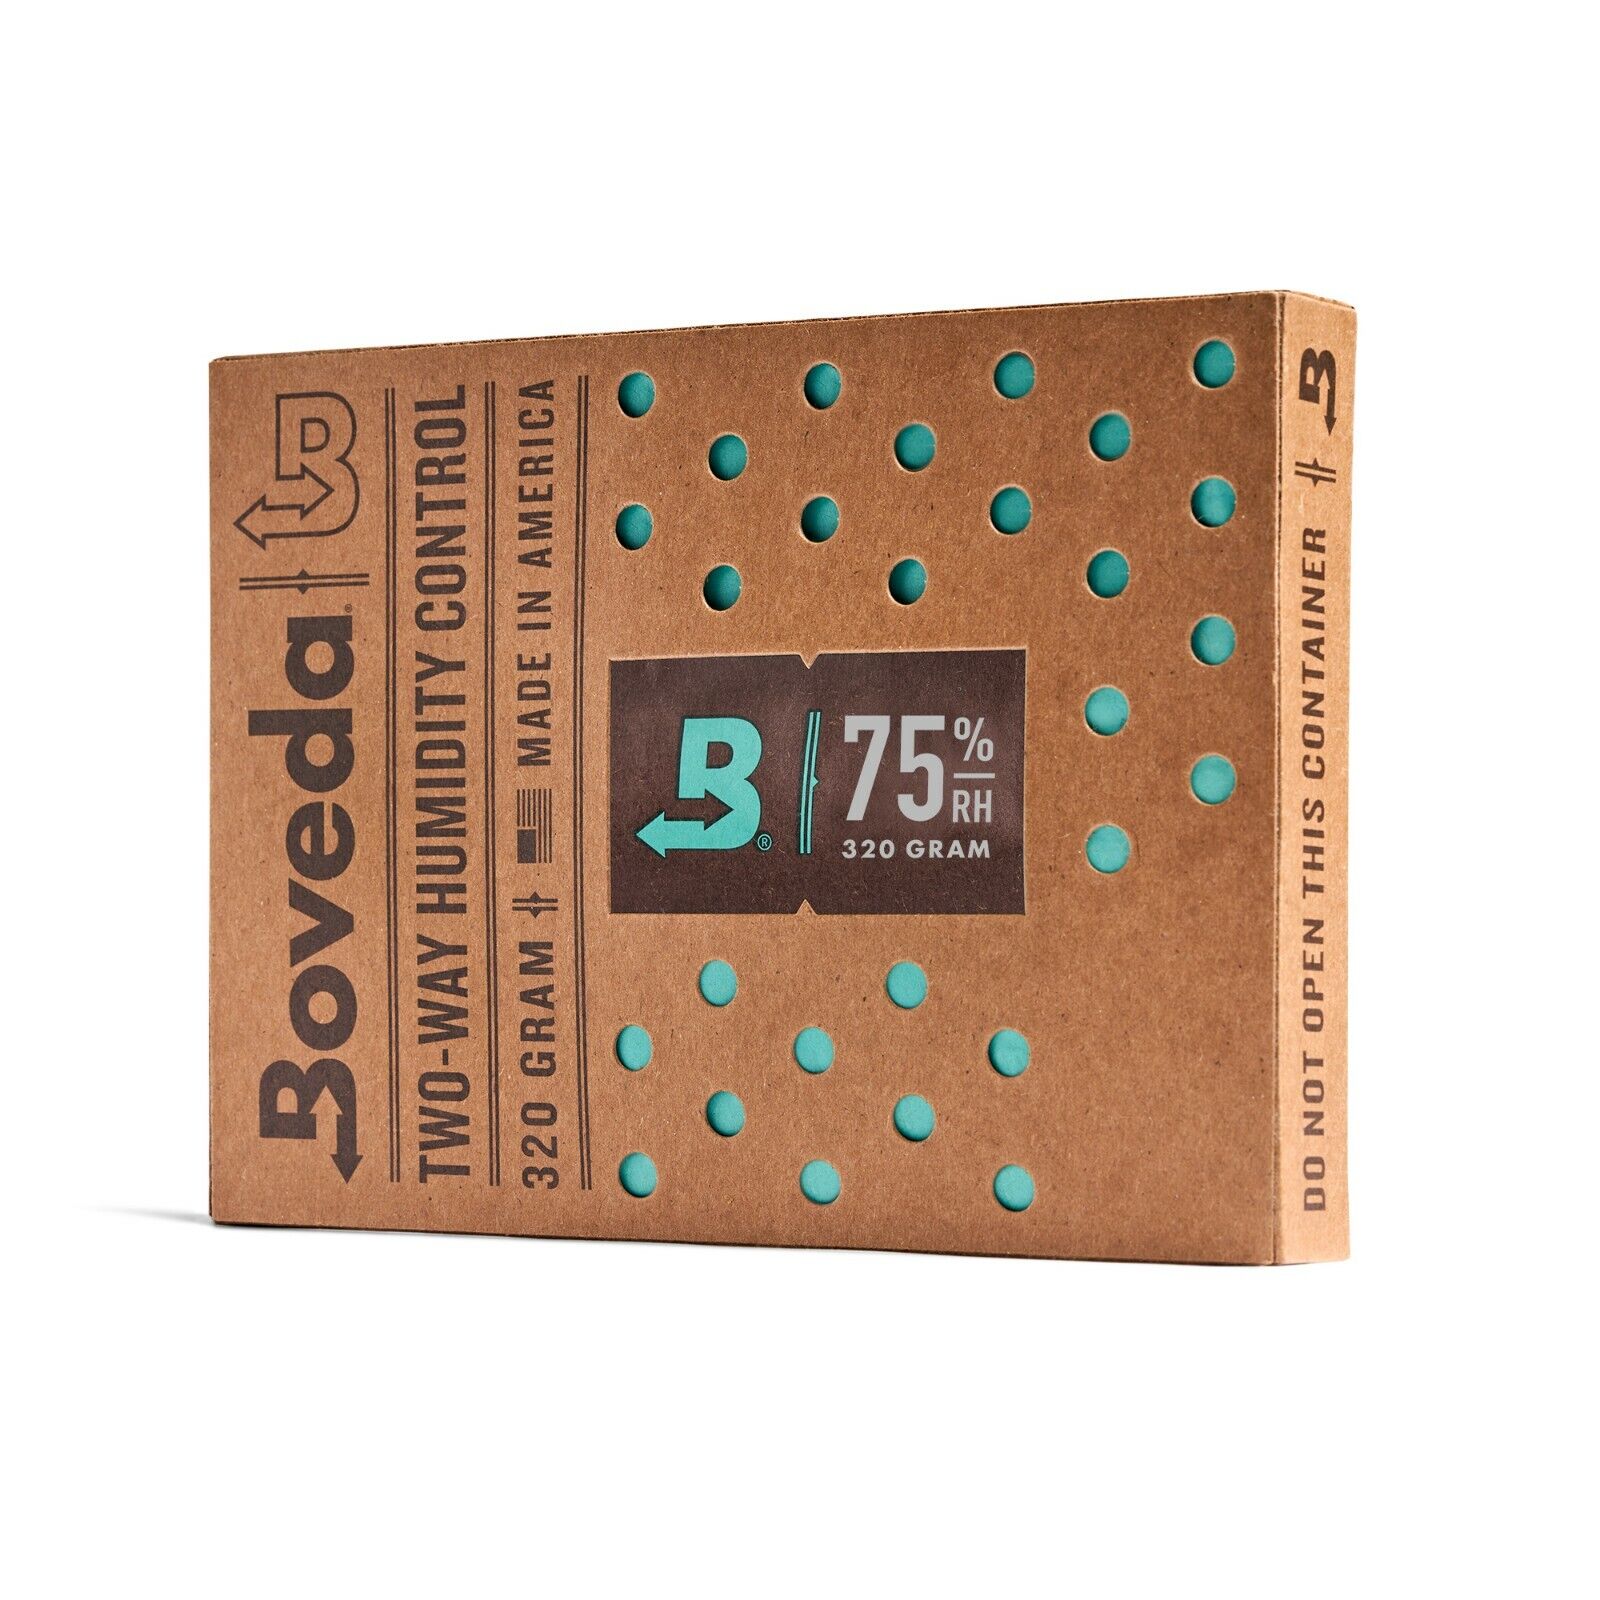 Boveda 75% RH 2-Way Humidity Control - Protects & Restores - Size 320 - 1 Count